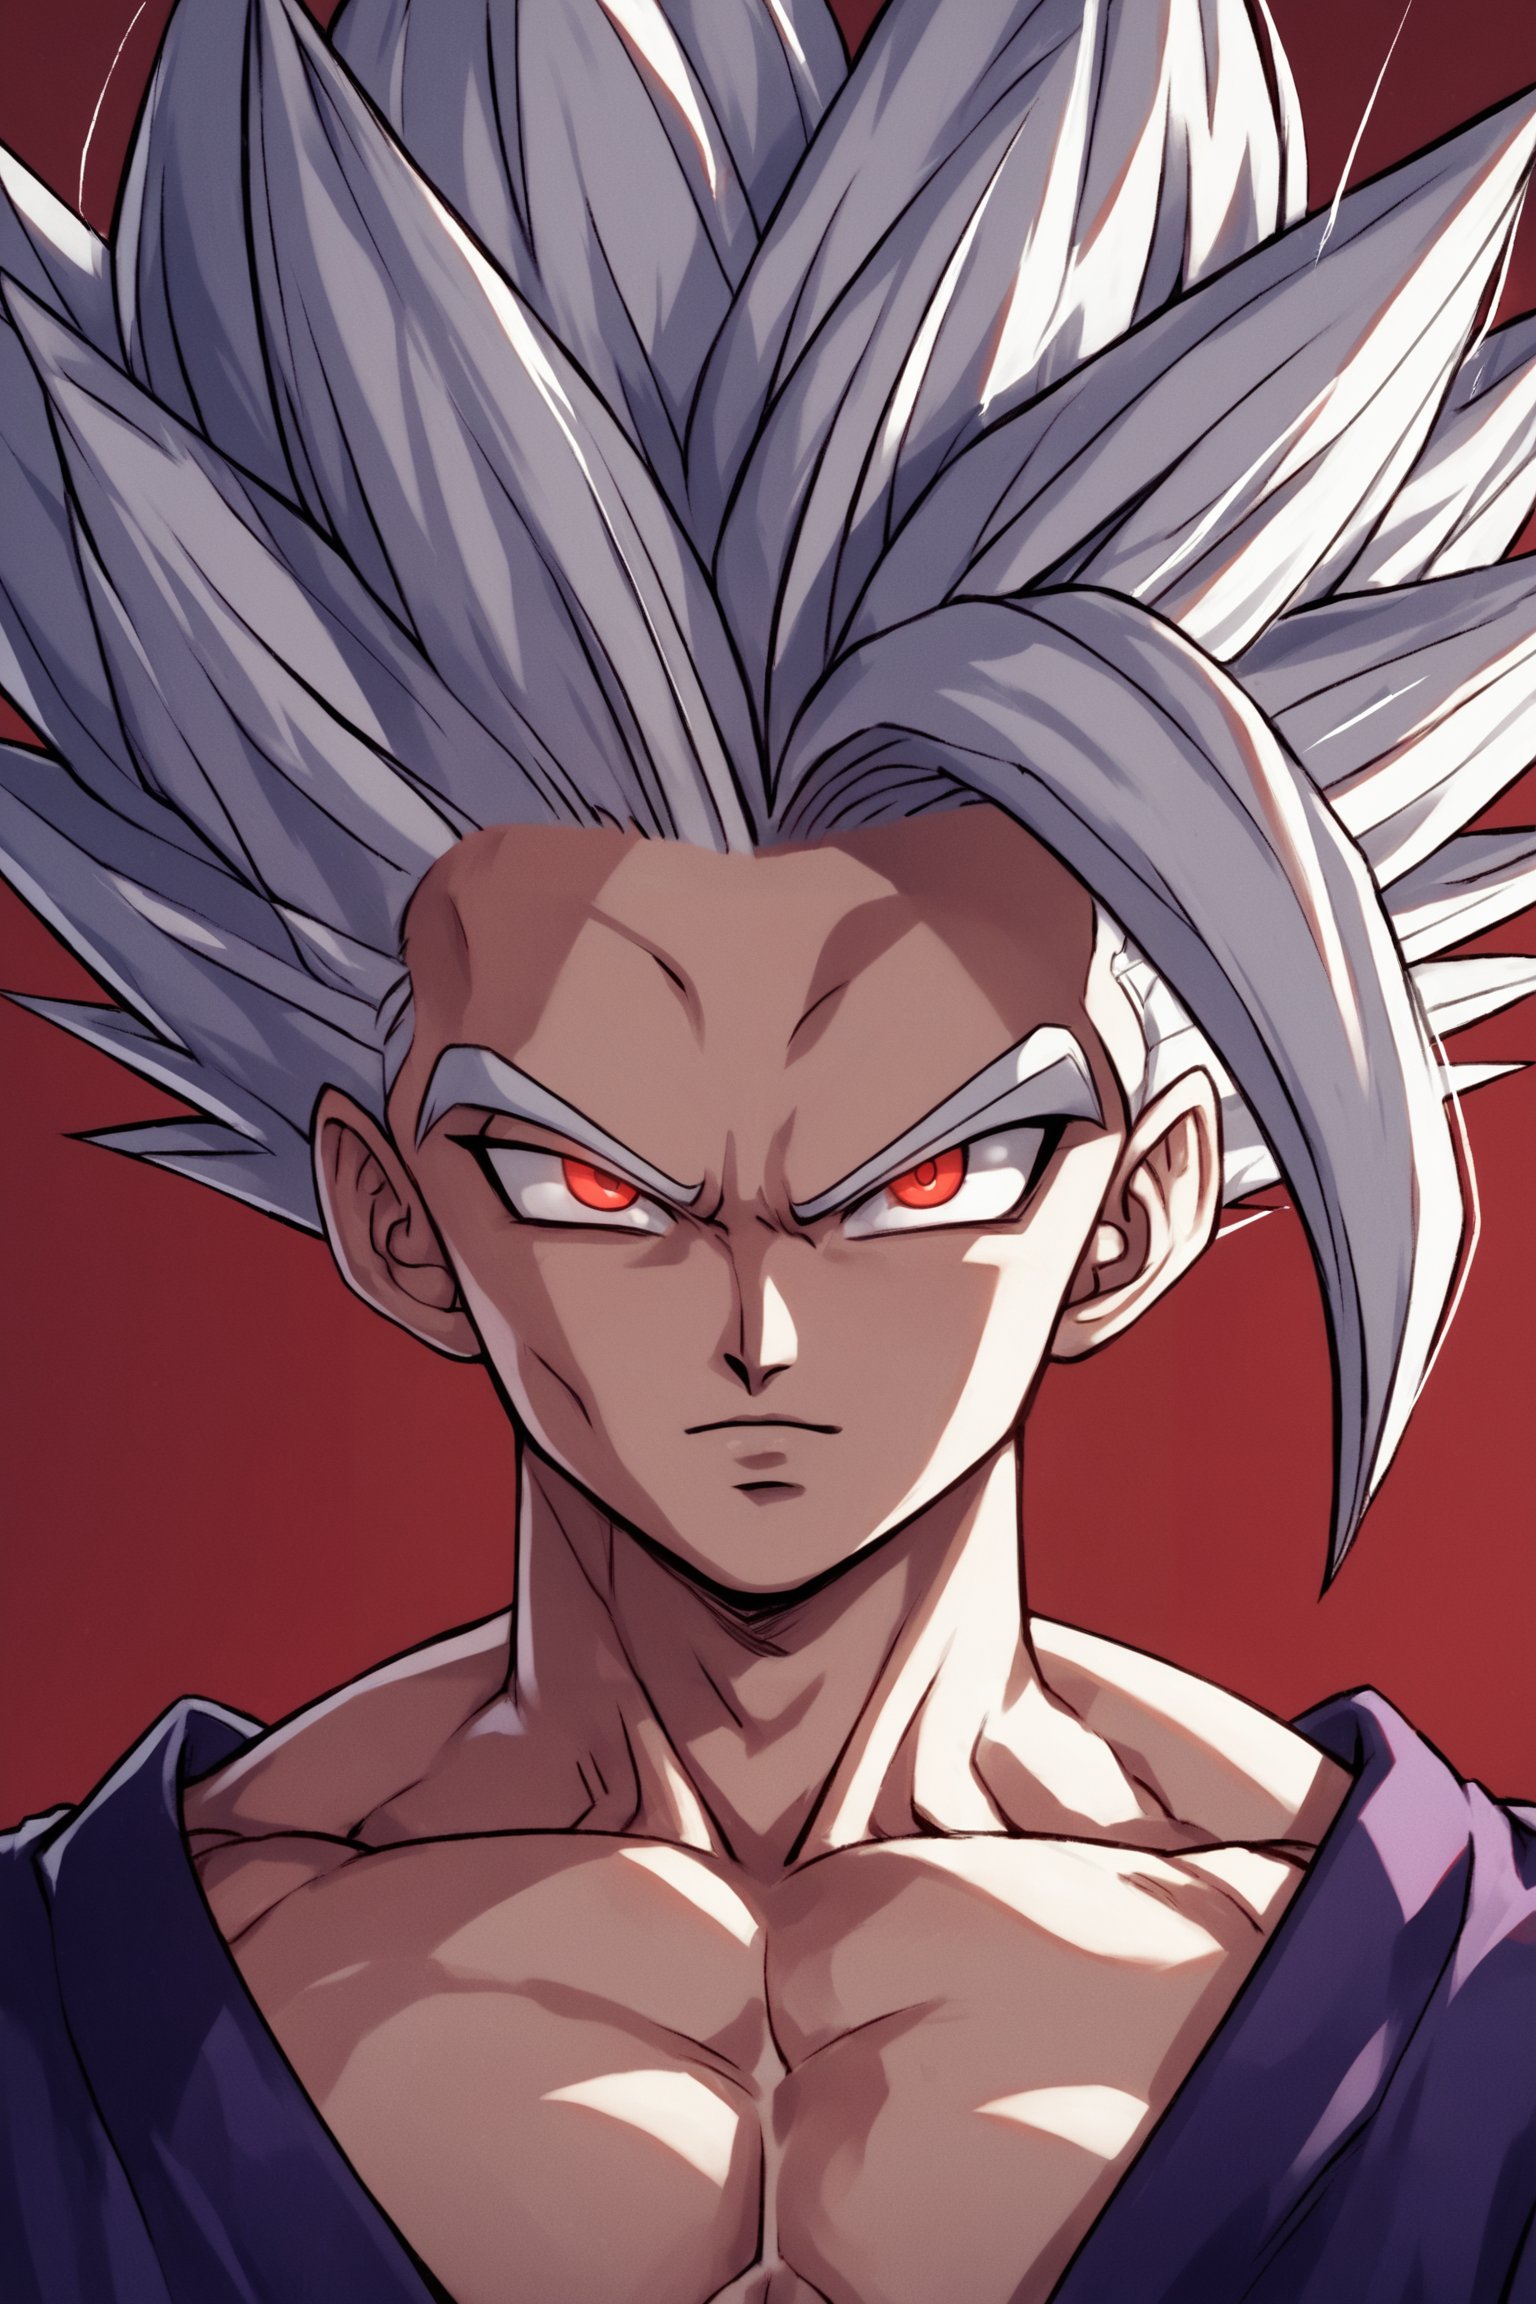 score_9, score_8_up, score_7_up, score_6_up, score_5_up, score_4_up,gohan_beast, red eyes, solo, spiked hair, white hair, portrait, dramatic lighting, red background, source_cartoon


